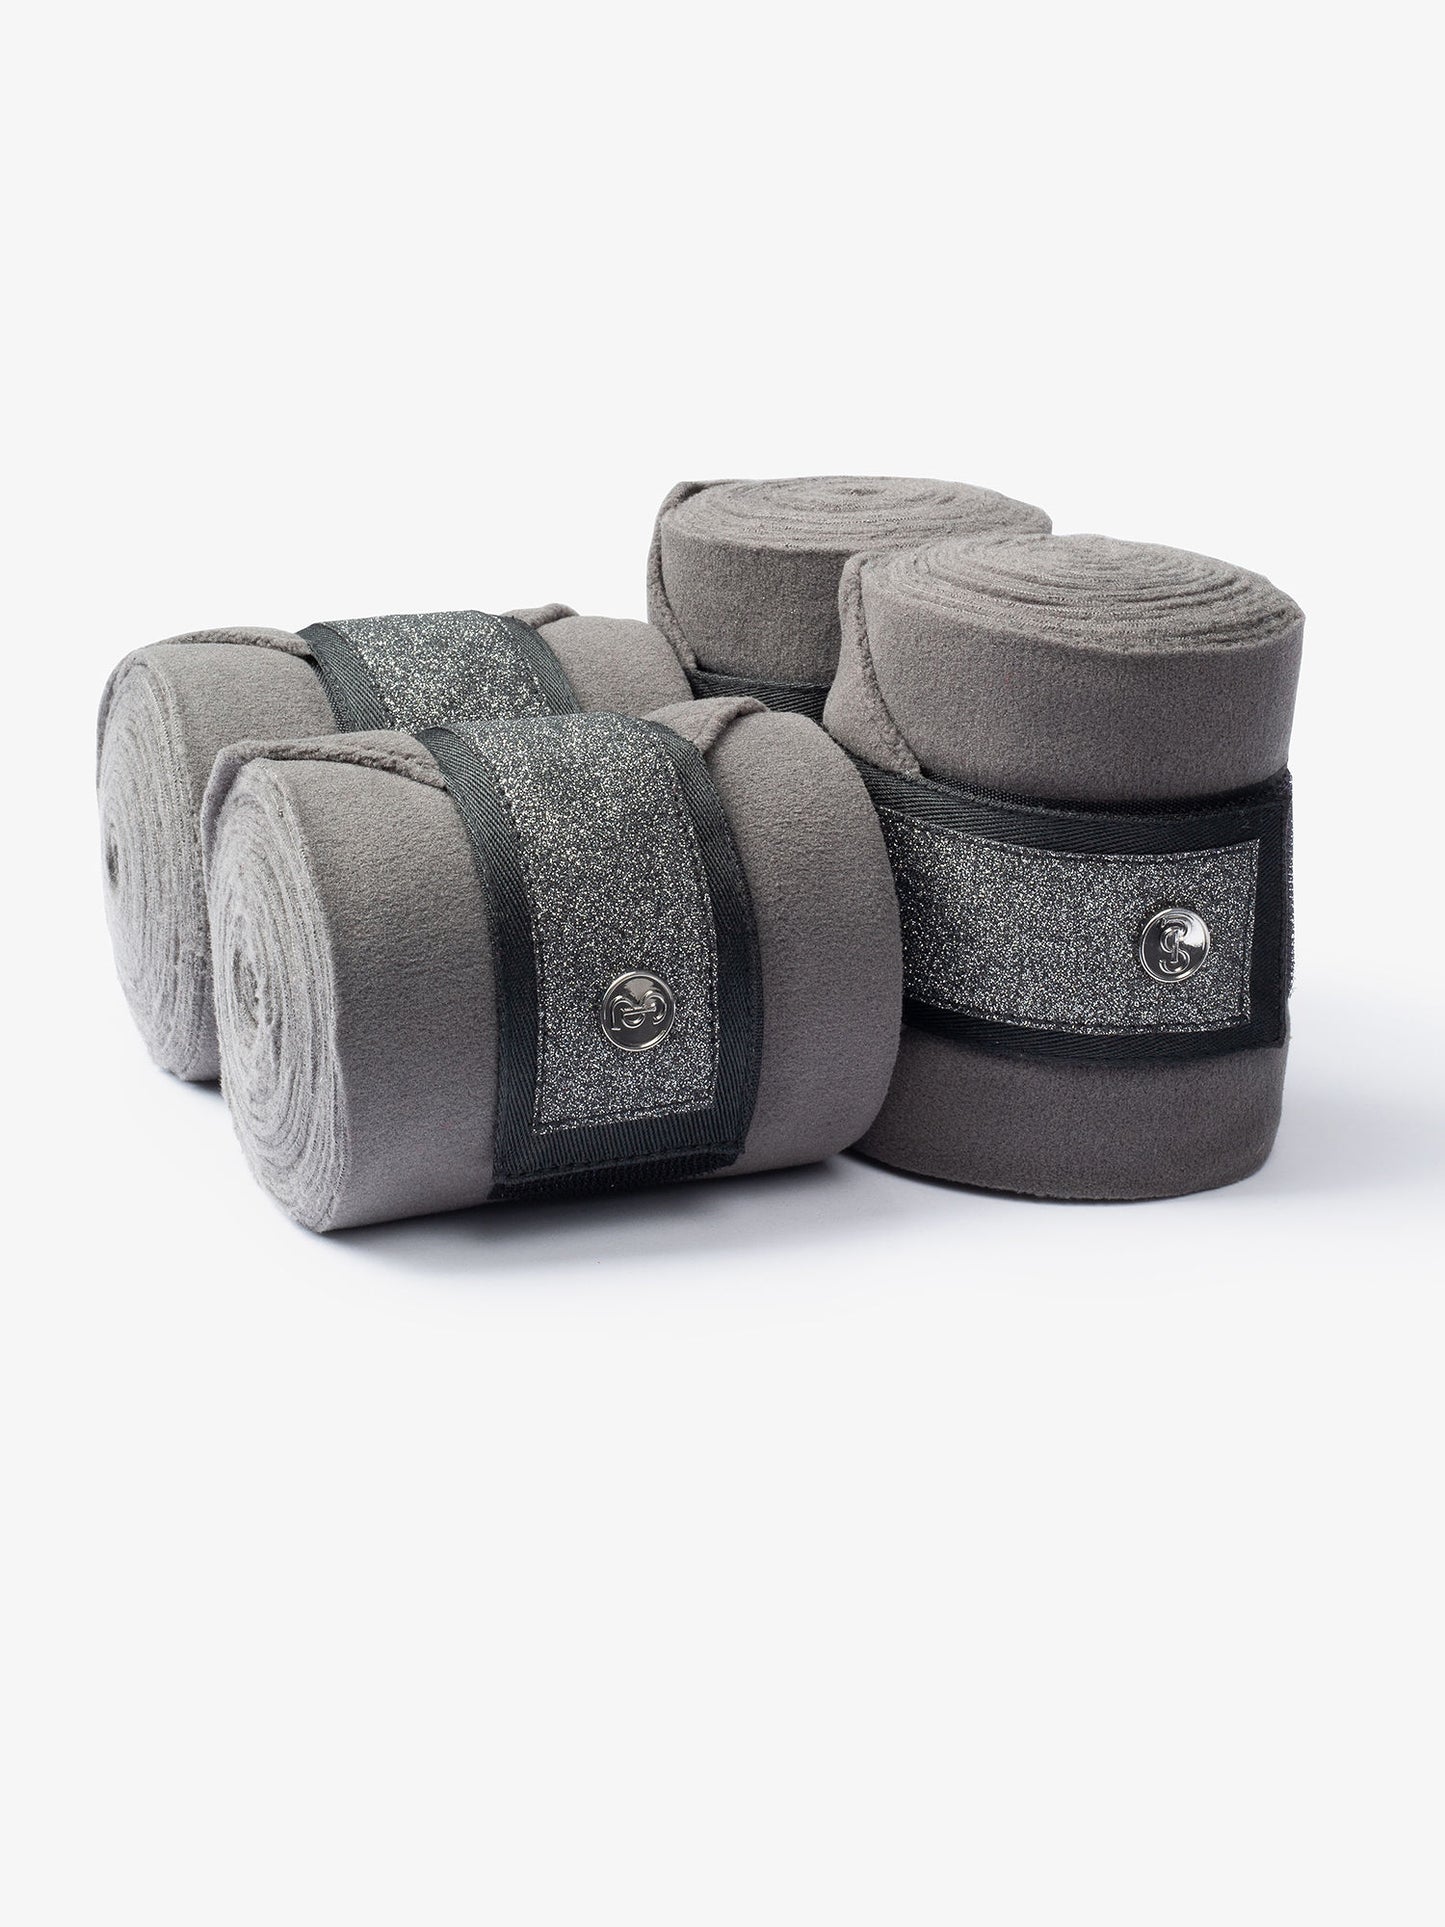 Ps of Sweden - Stardust Christmas Collection - Bandages - Gun Metal